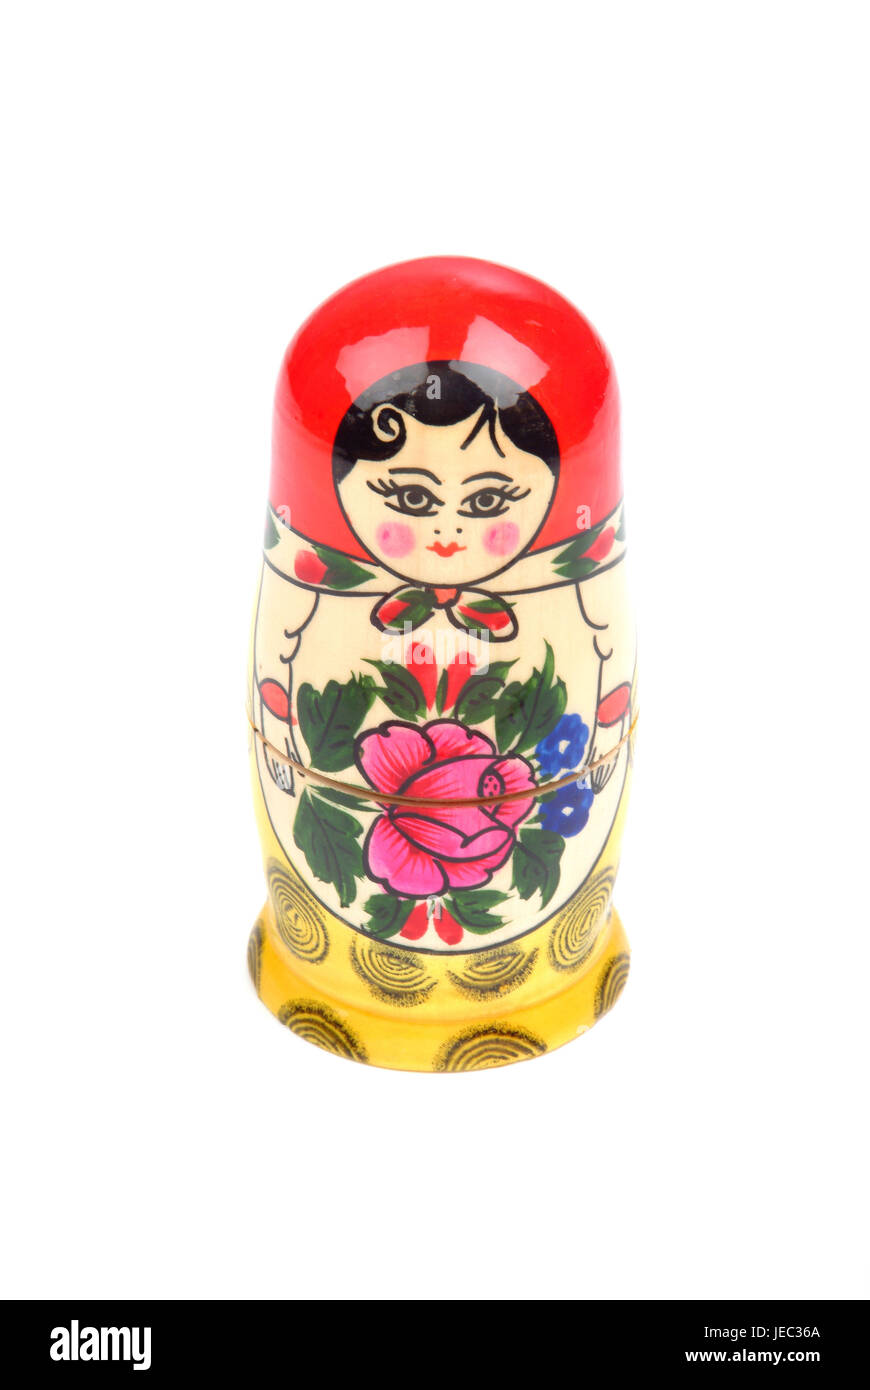 6× Matroschka Babuschka Matrjoschka Matruschka Matroyshka Holz Puppe 6 Tier 